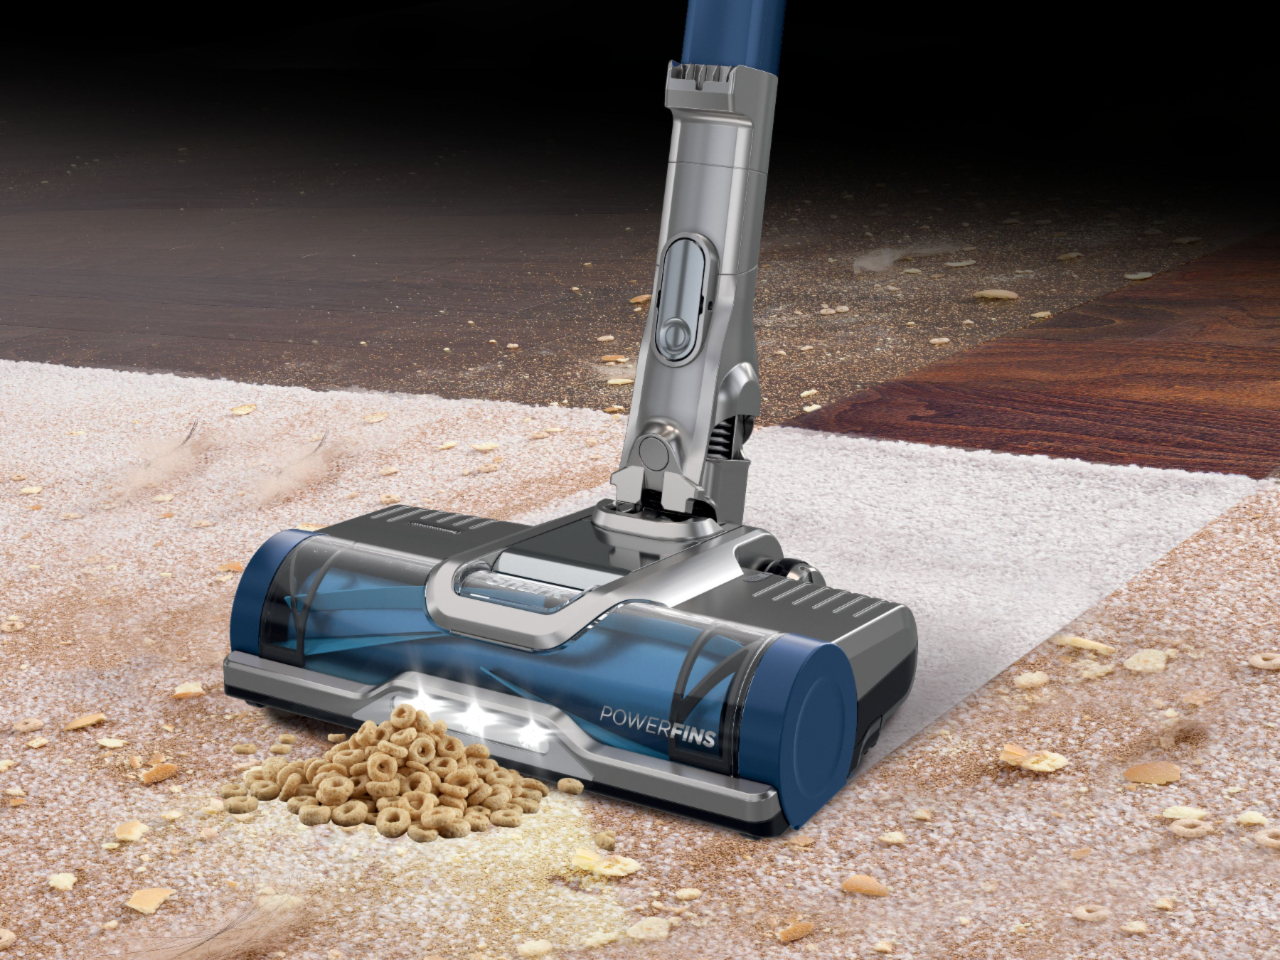 https://www.digitaltrends.com/wp-content/uploads/2022/03/shark-cordless-pet-plus-with-anti-allergen-complete-seal-vacuuming-cereal-and-debris-from-hardwood-and-carpet.jpg?fit=1280%2C960&p=1